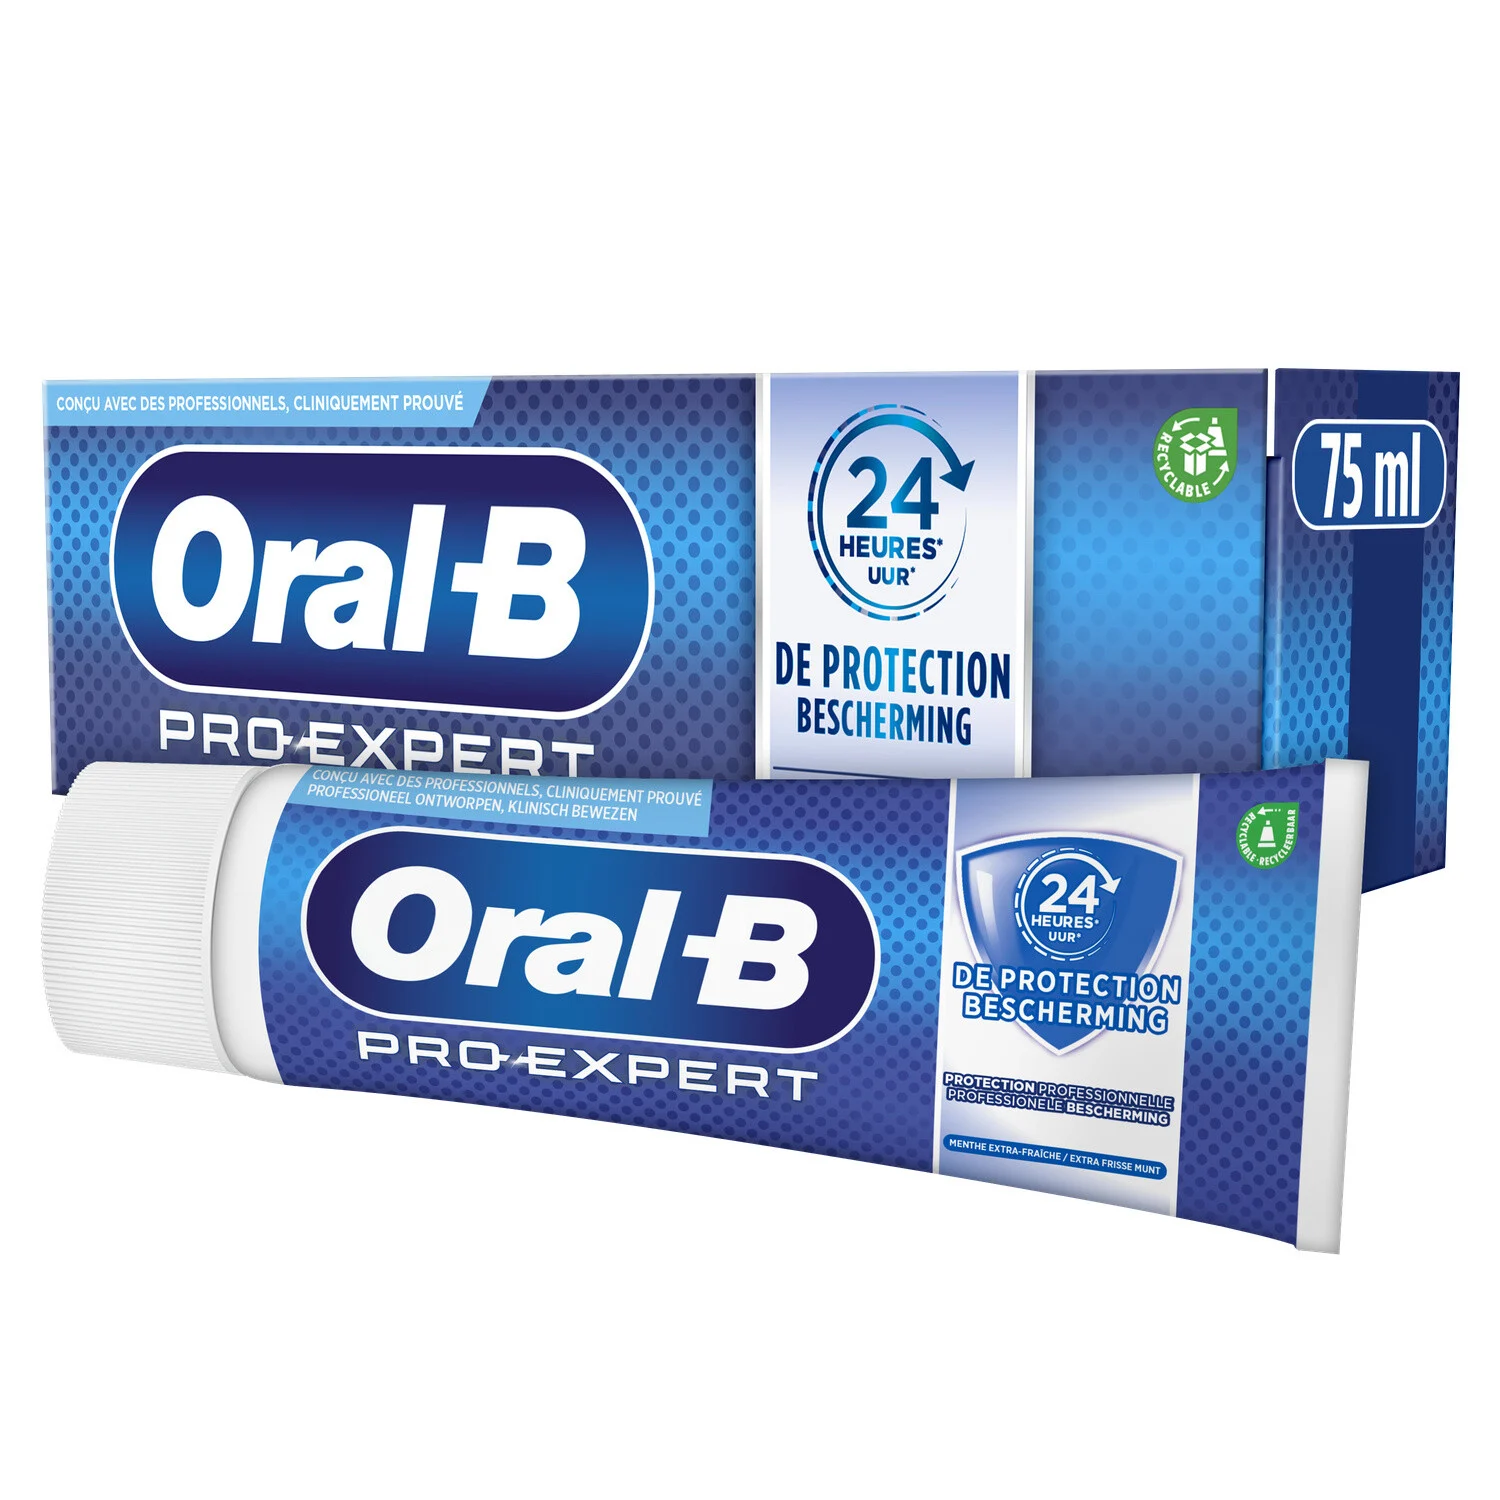 75ml Oral B Dent Protect Menth